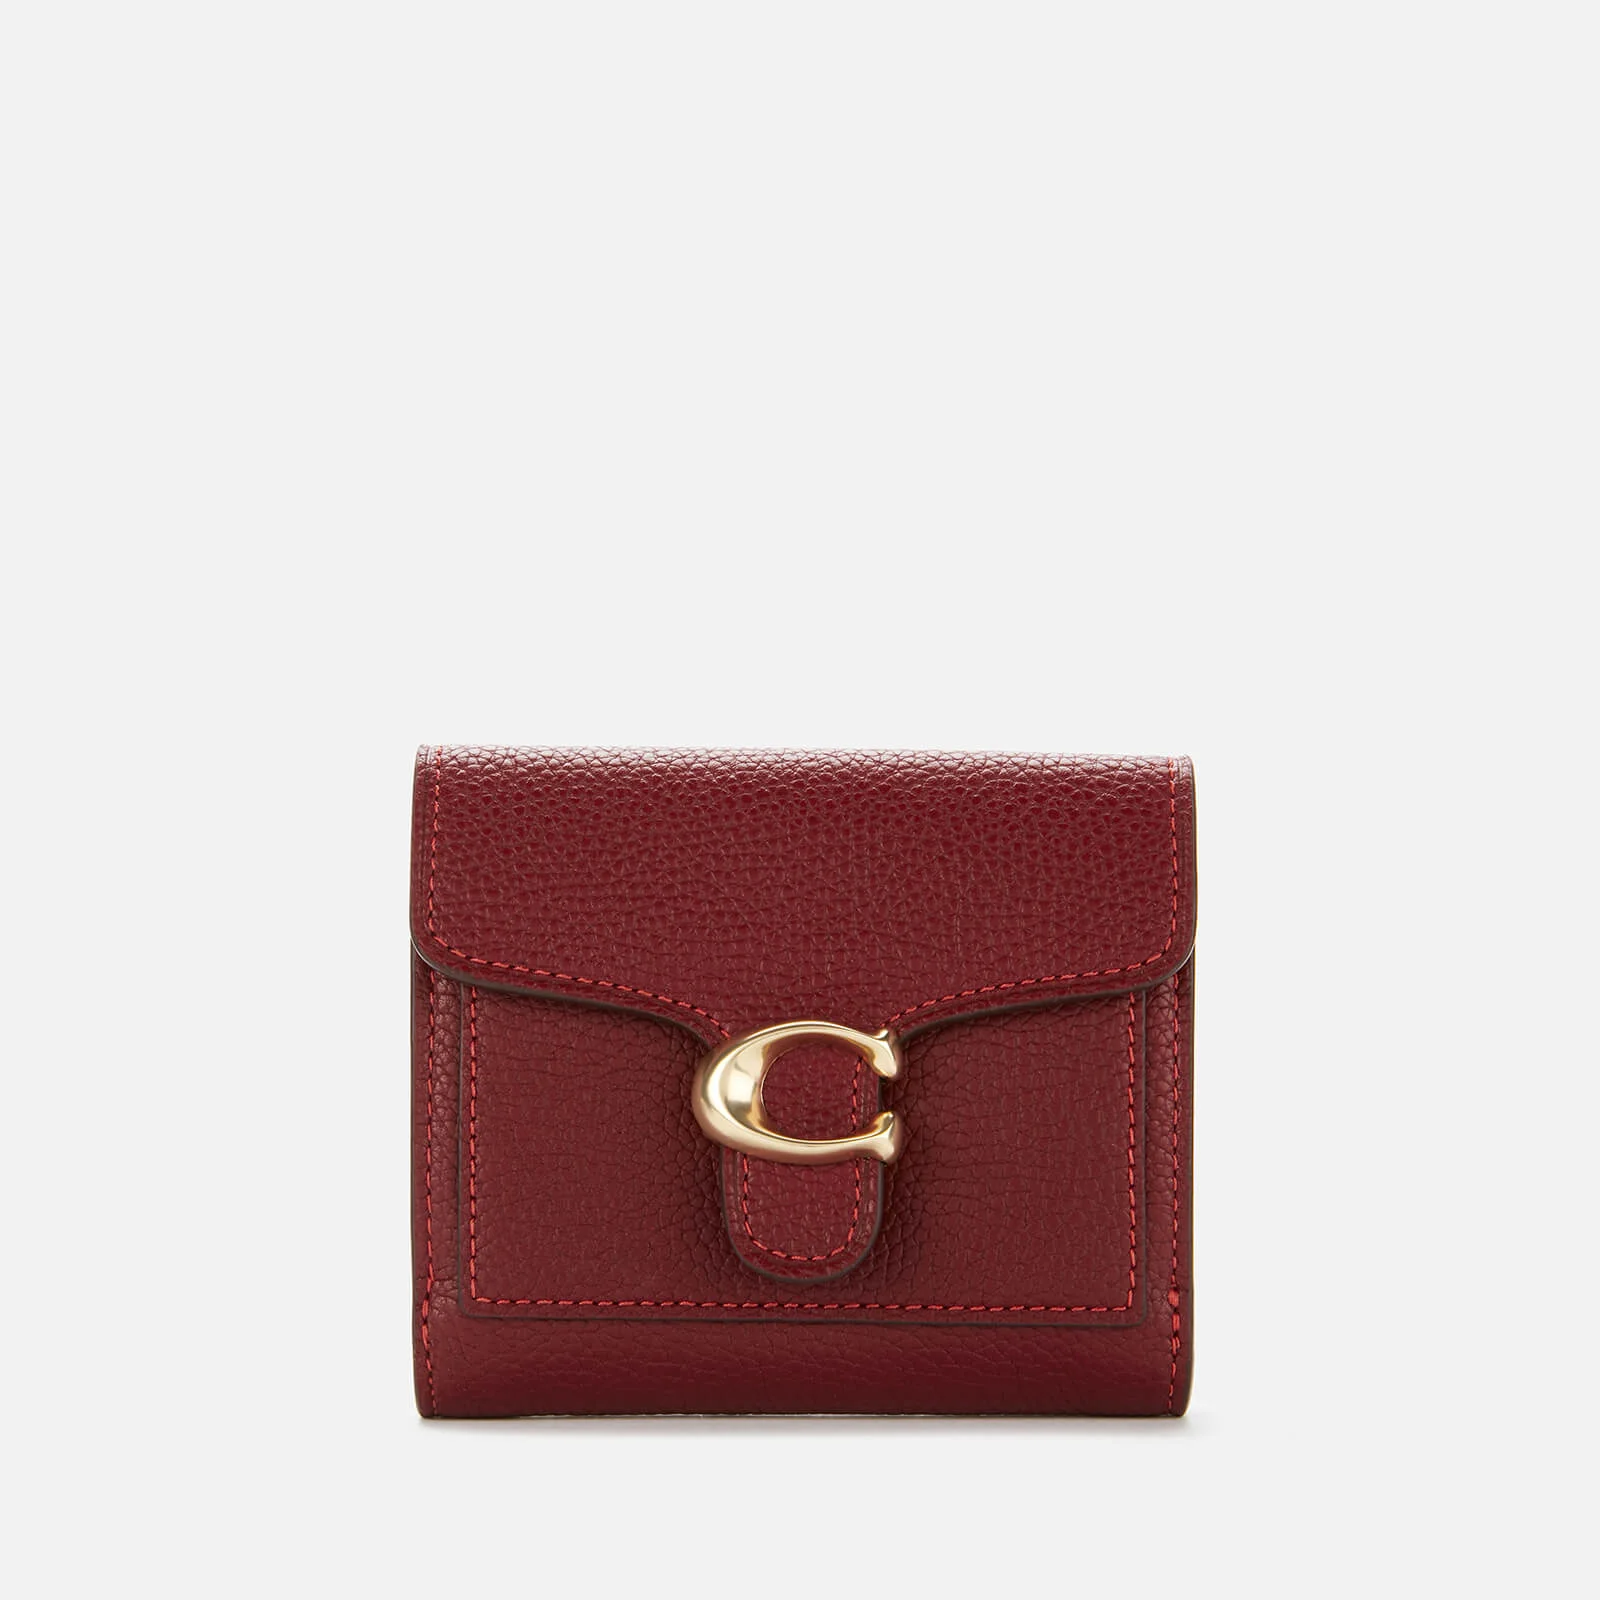 Coach Women's Polished Pebble Tabby Small Wallet - Deep Red Image 1